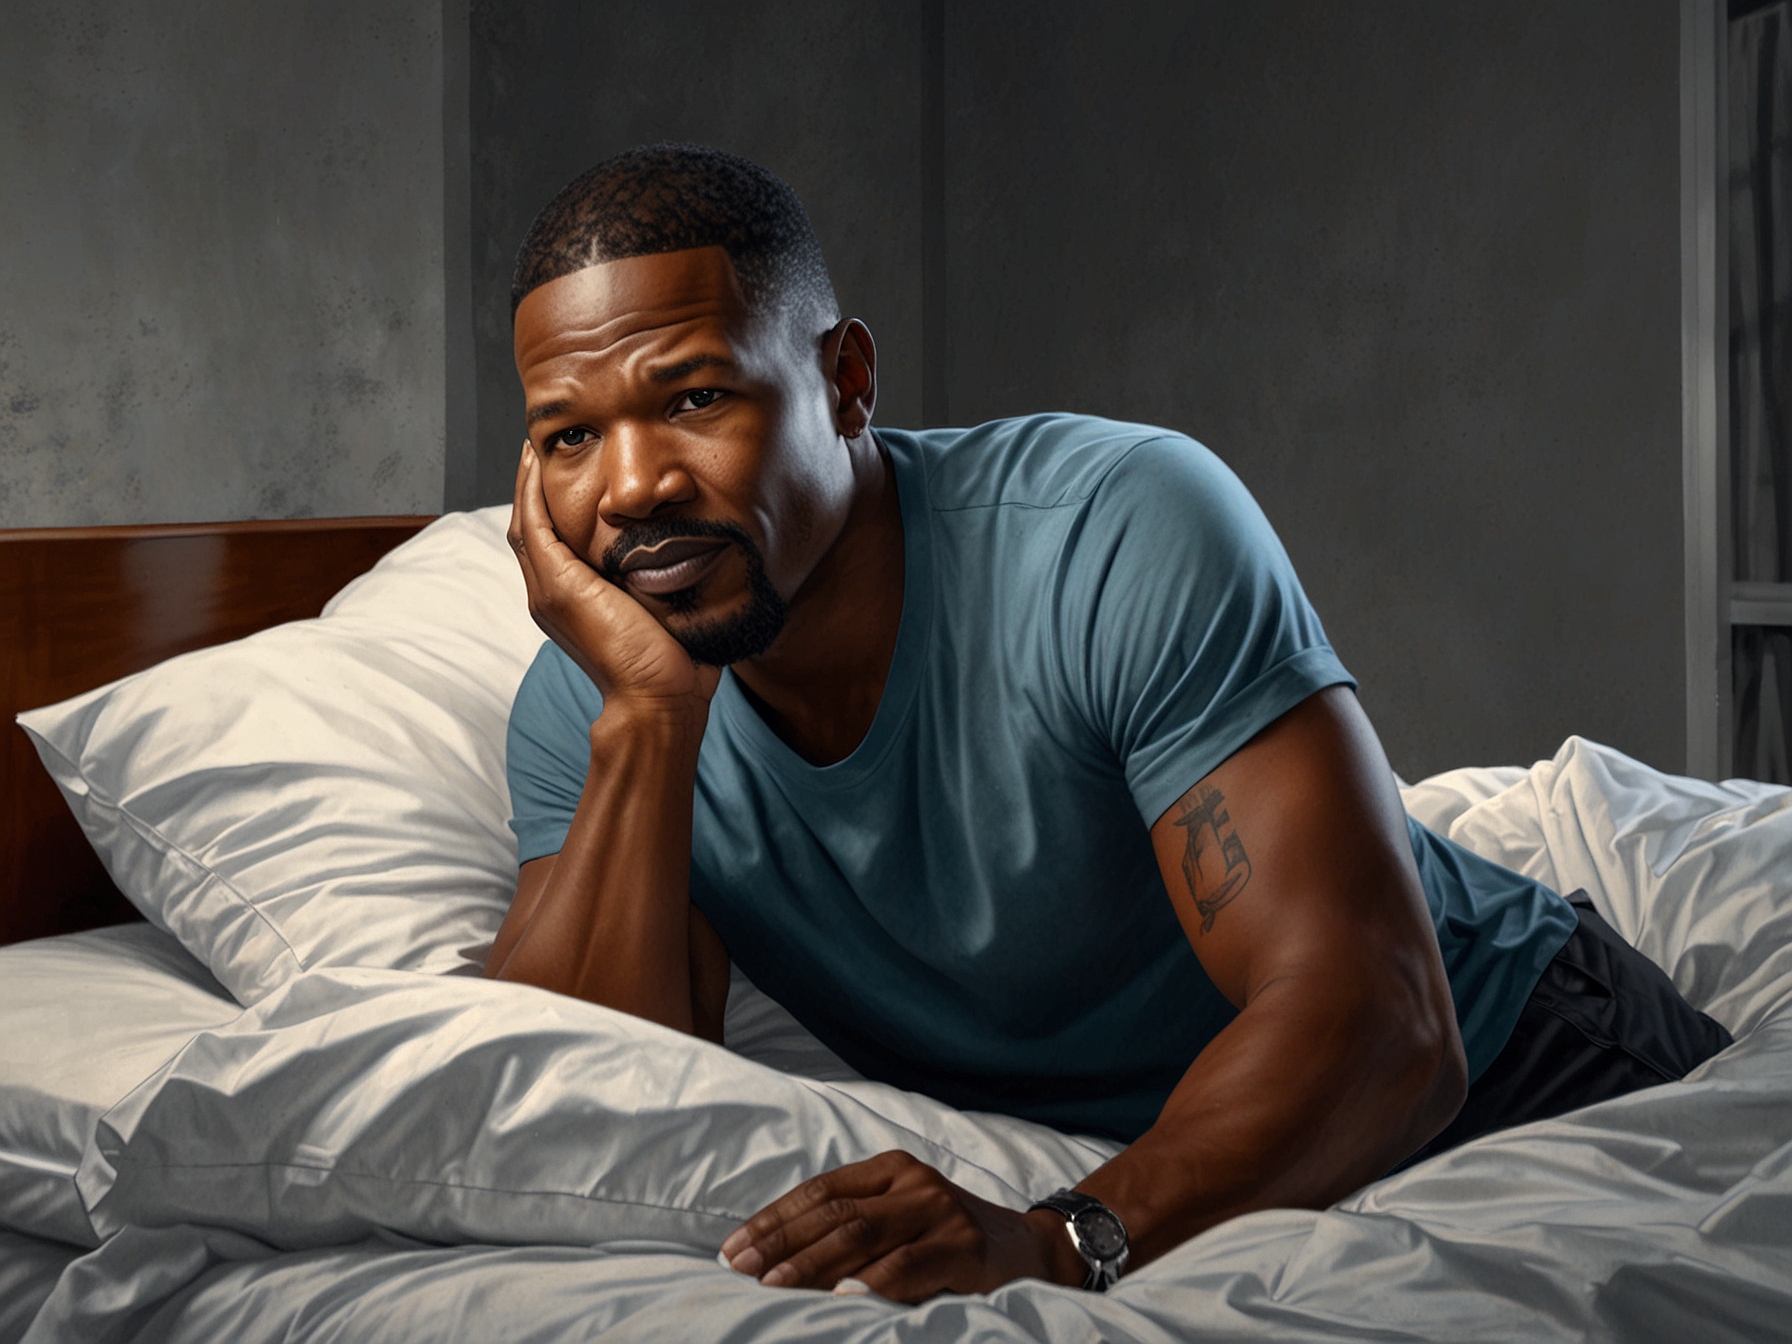 Jamie Foxx reflects deeply on his hospital bed, showing the resilience and emotional turmoil he faced during his 20 days of battling a severe health crisis.